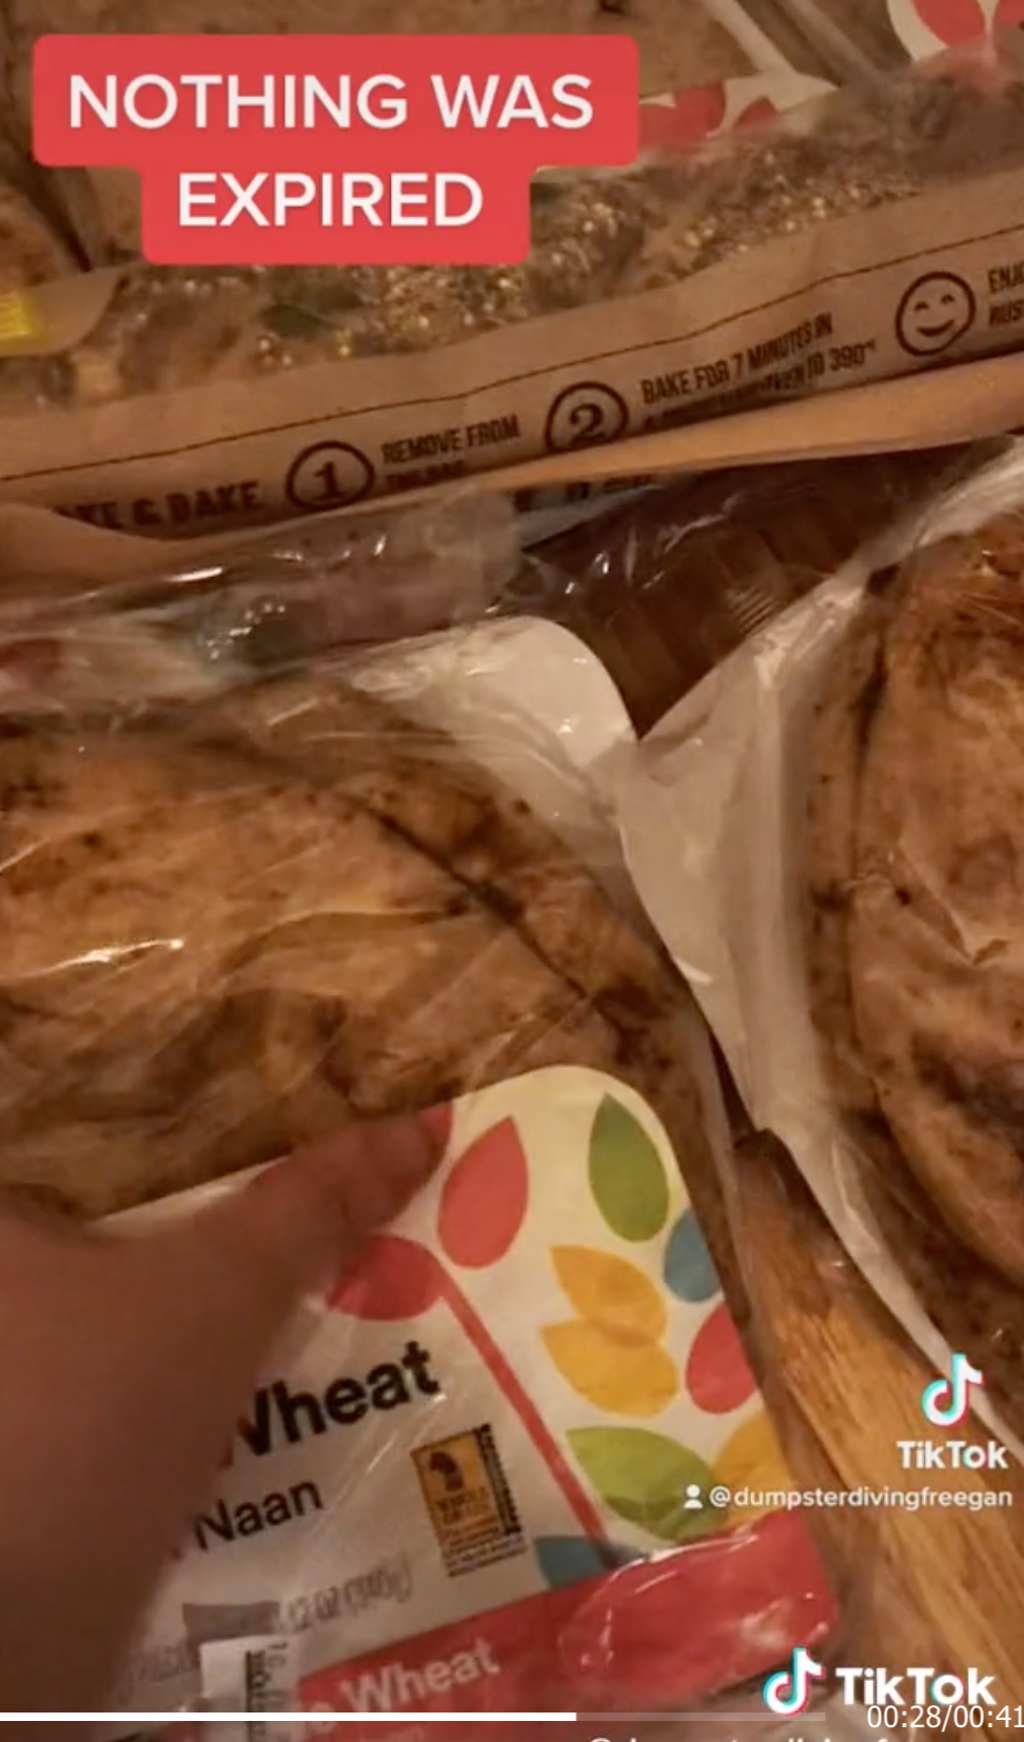 TikTok reveals huge amounts of food thrown out by Whole Foods